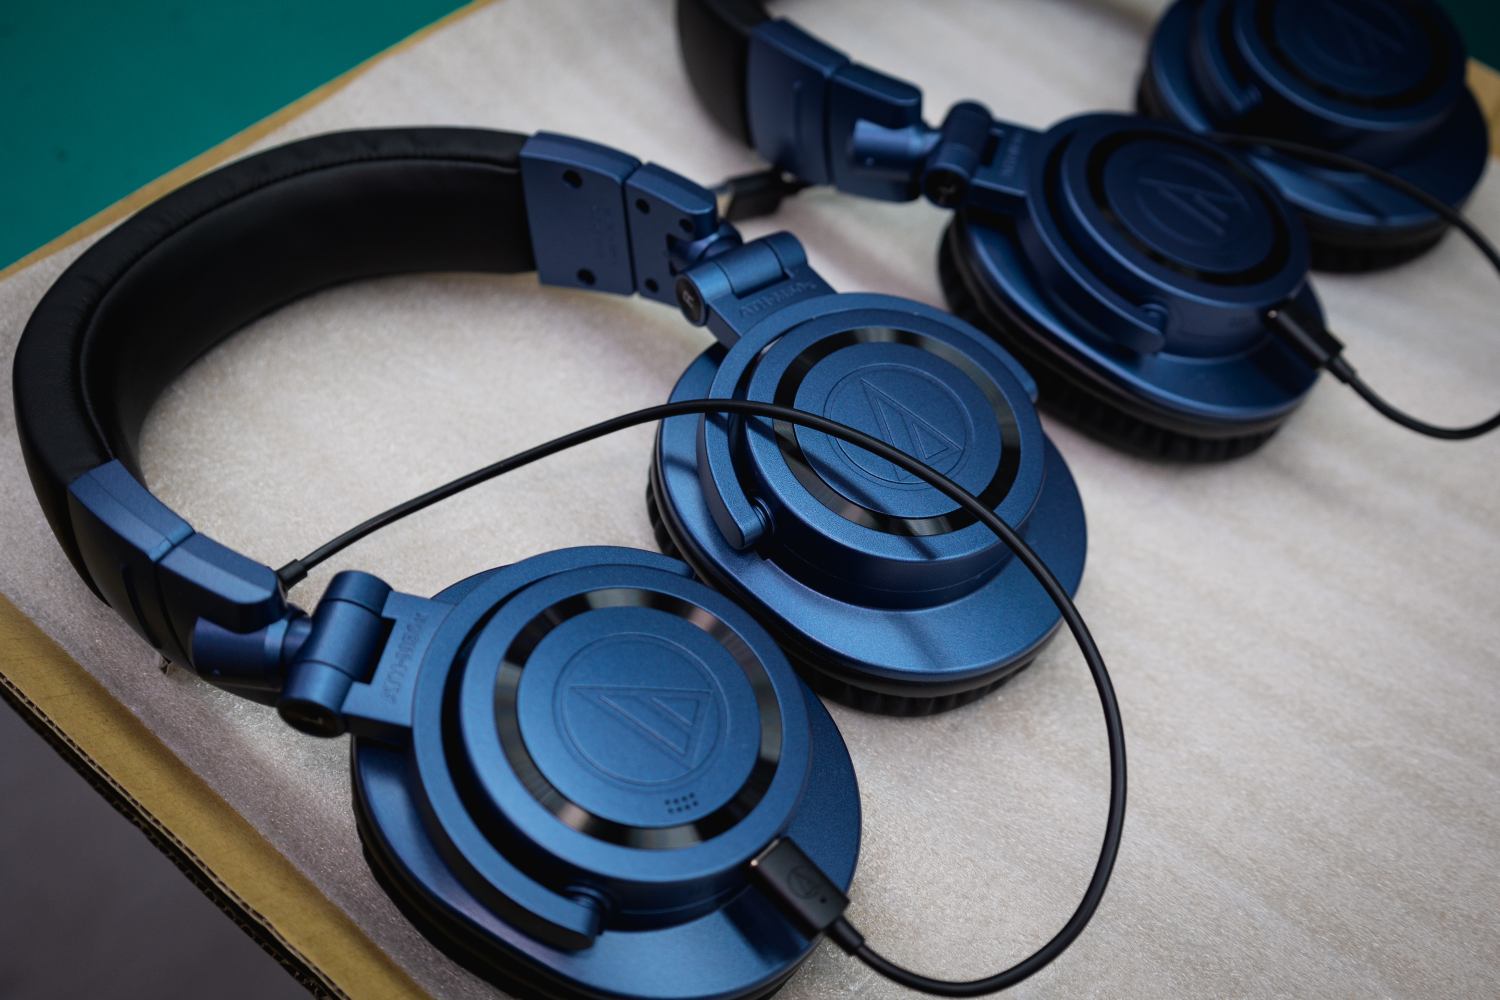 Audio-Technica drops new limited edition colourway for M50x